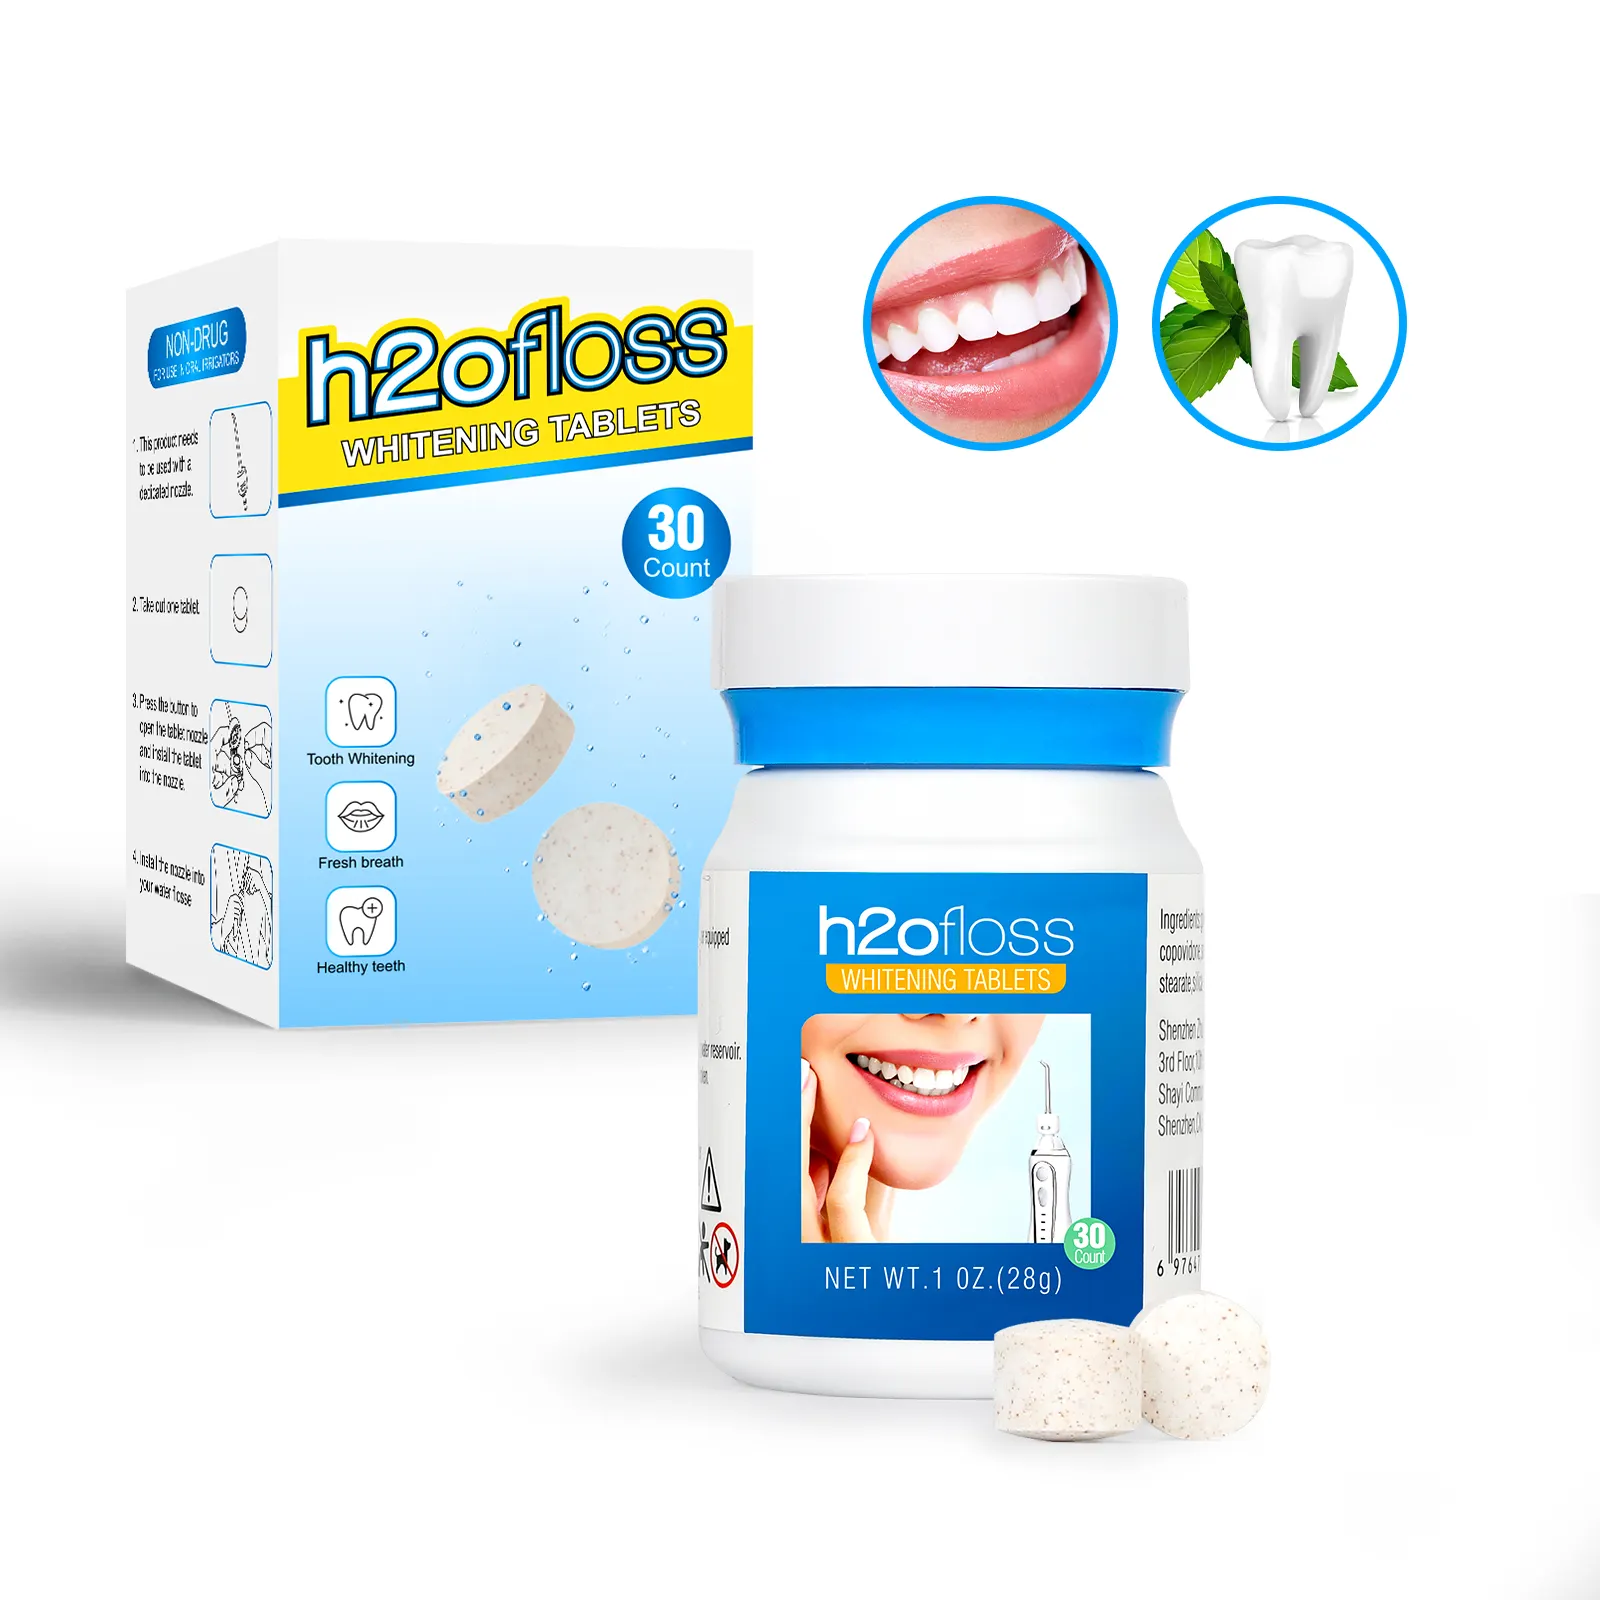 H2ofloss New Professional Oral Care Teeth Whitening Tablets For Use With Oral Irrigators